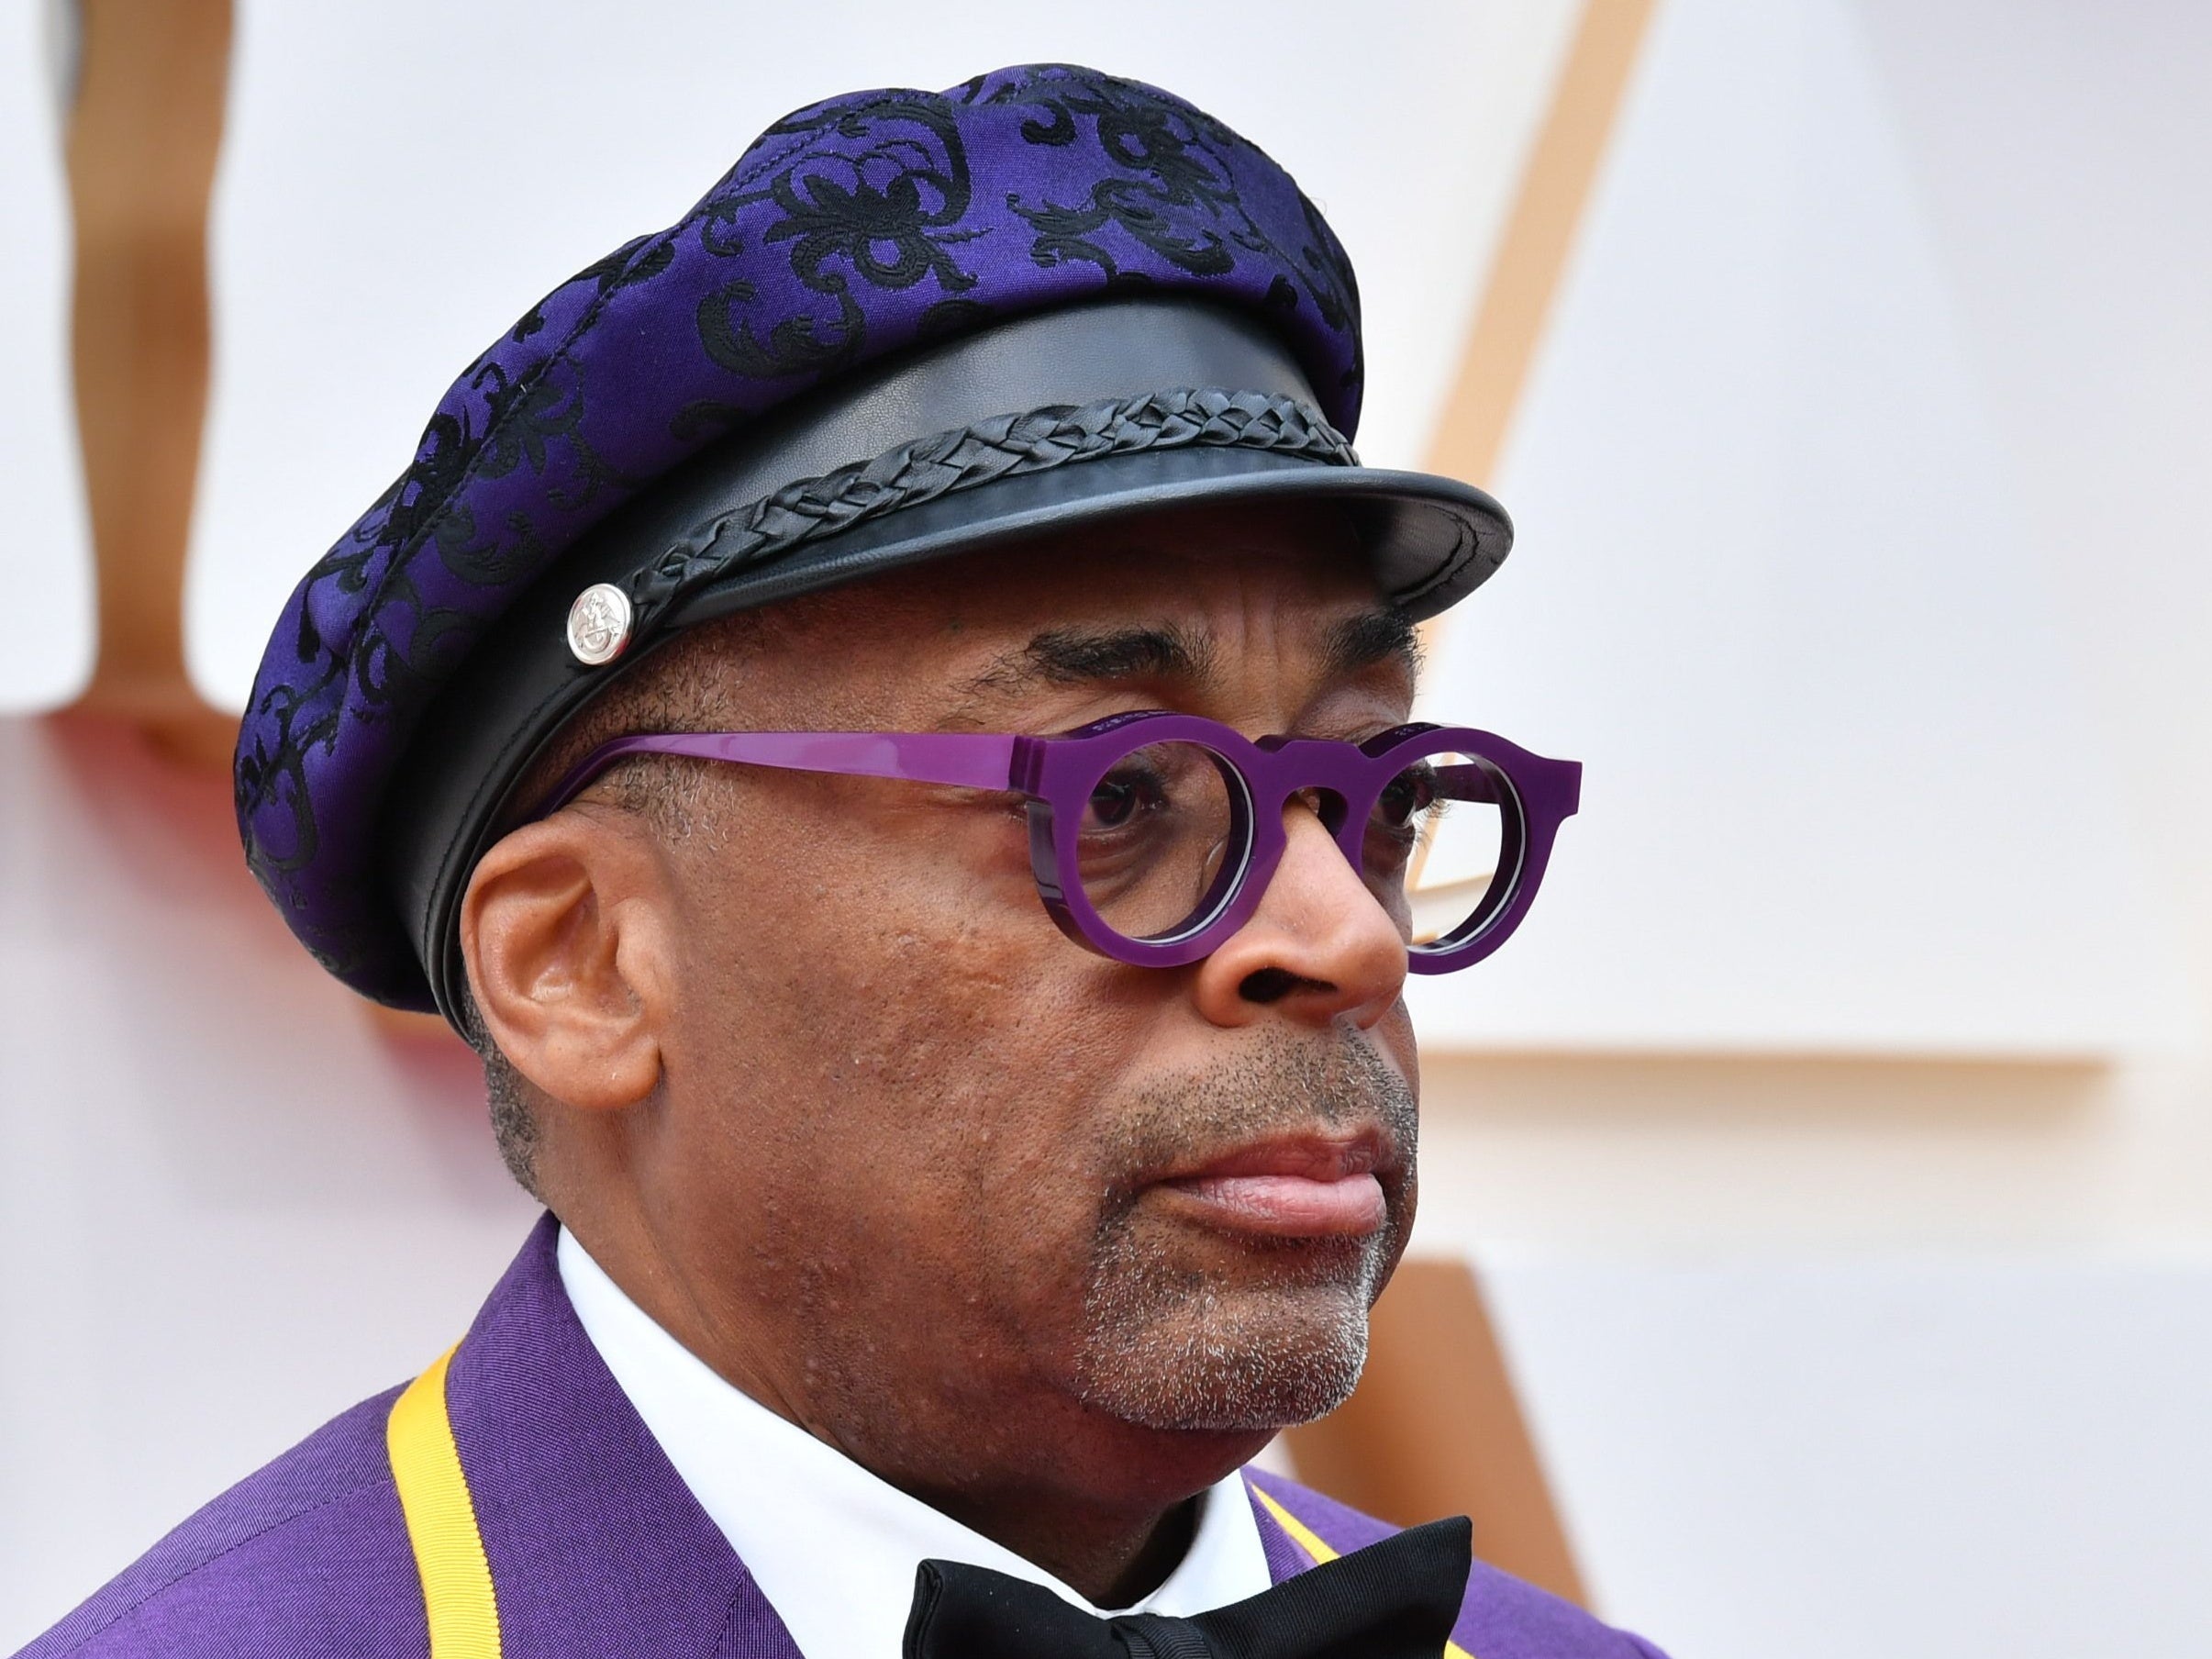 Spike Lee Pays Tribute To Kobe Bryant On Oscars Red Carpet